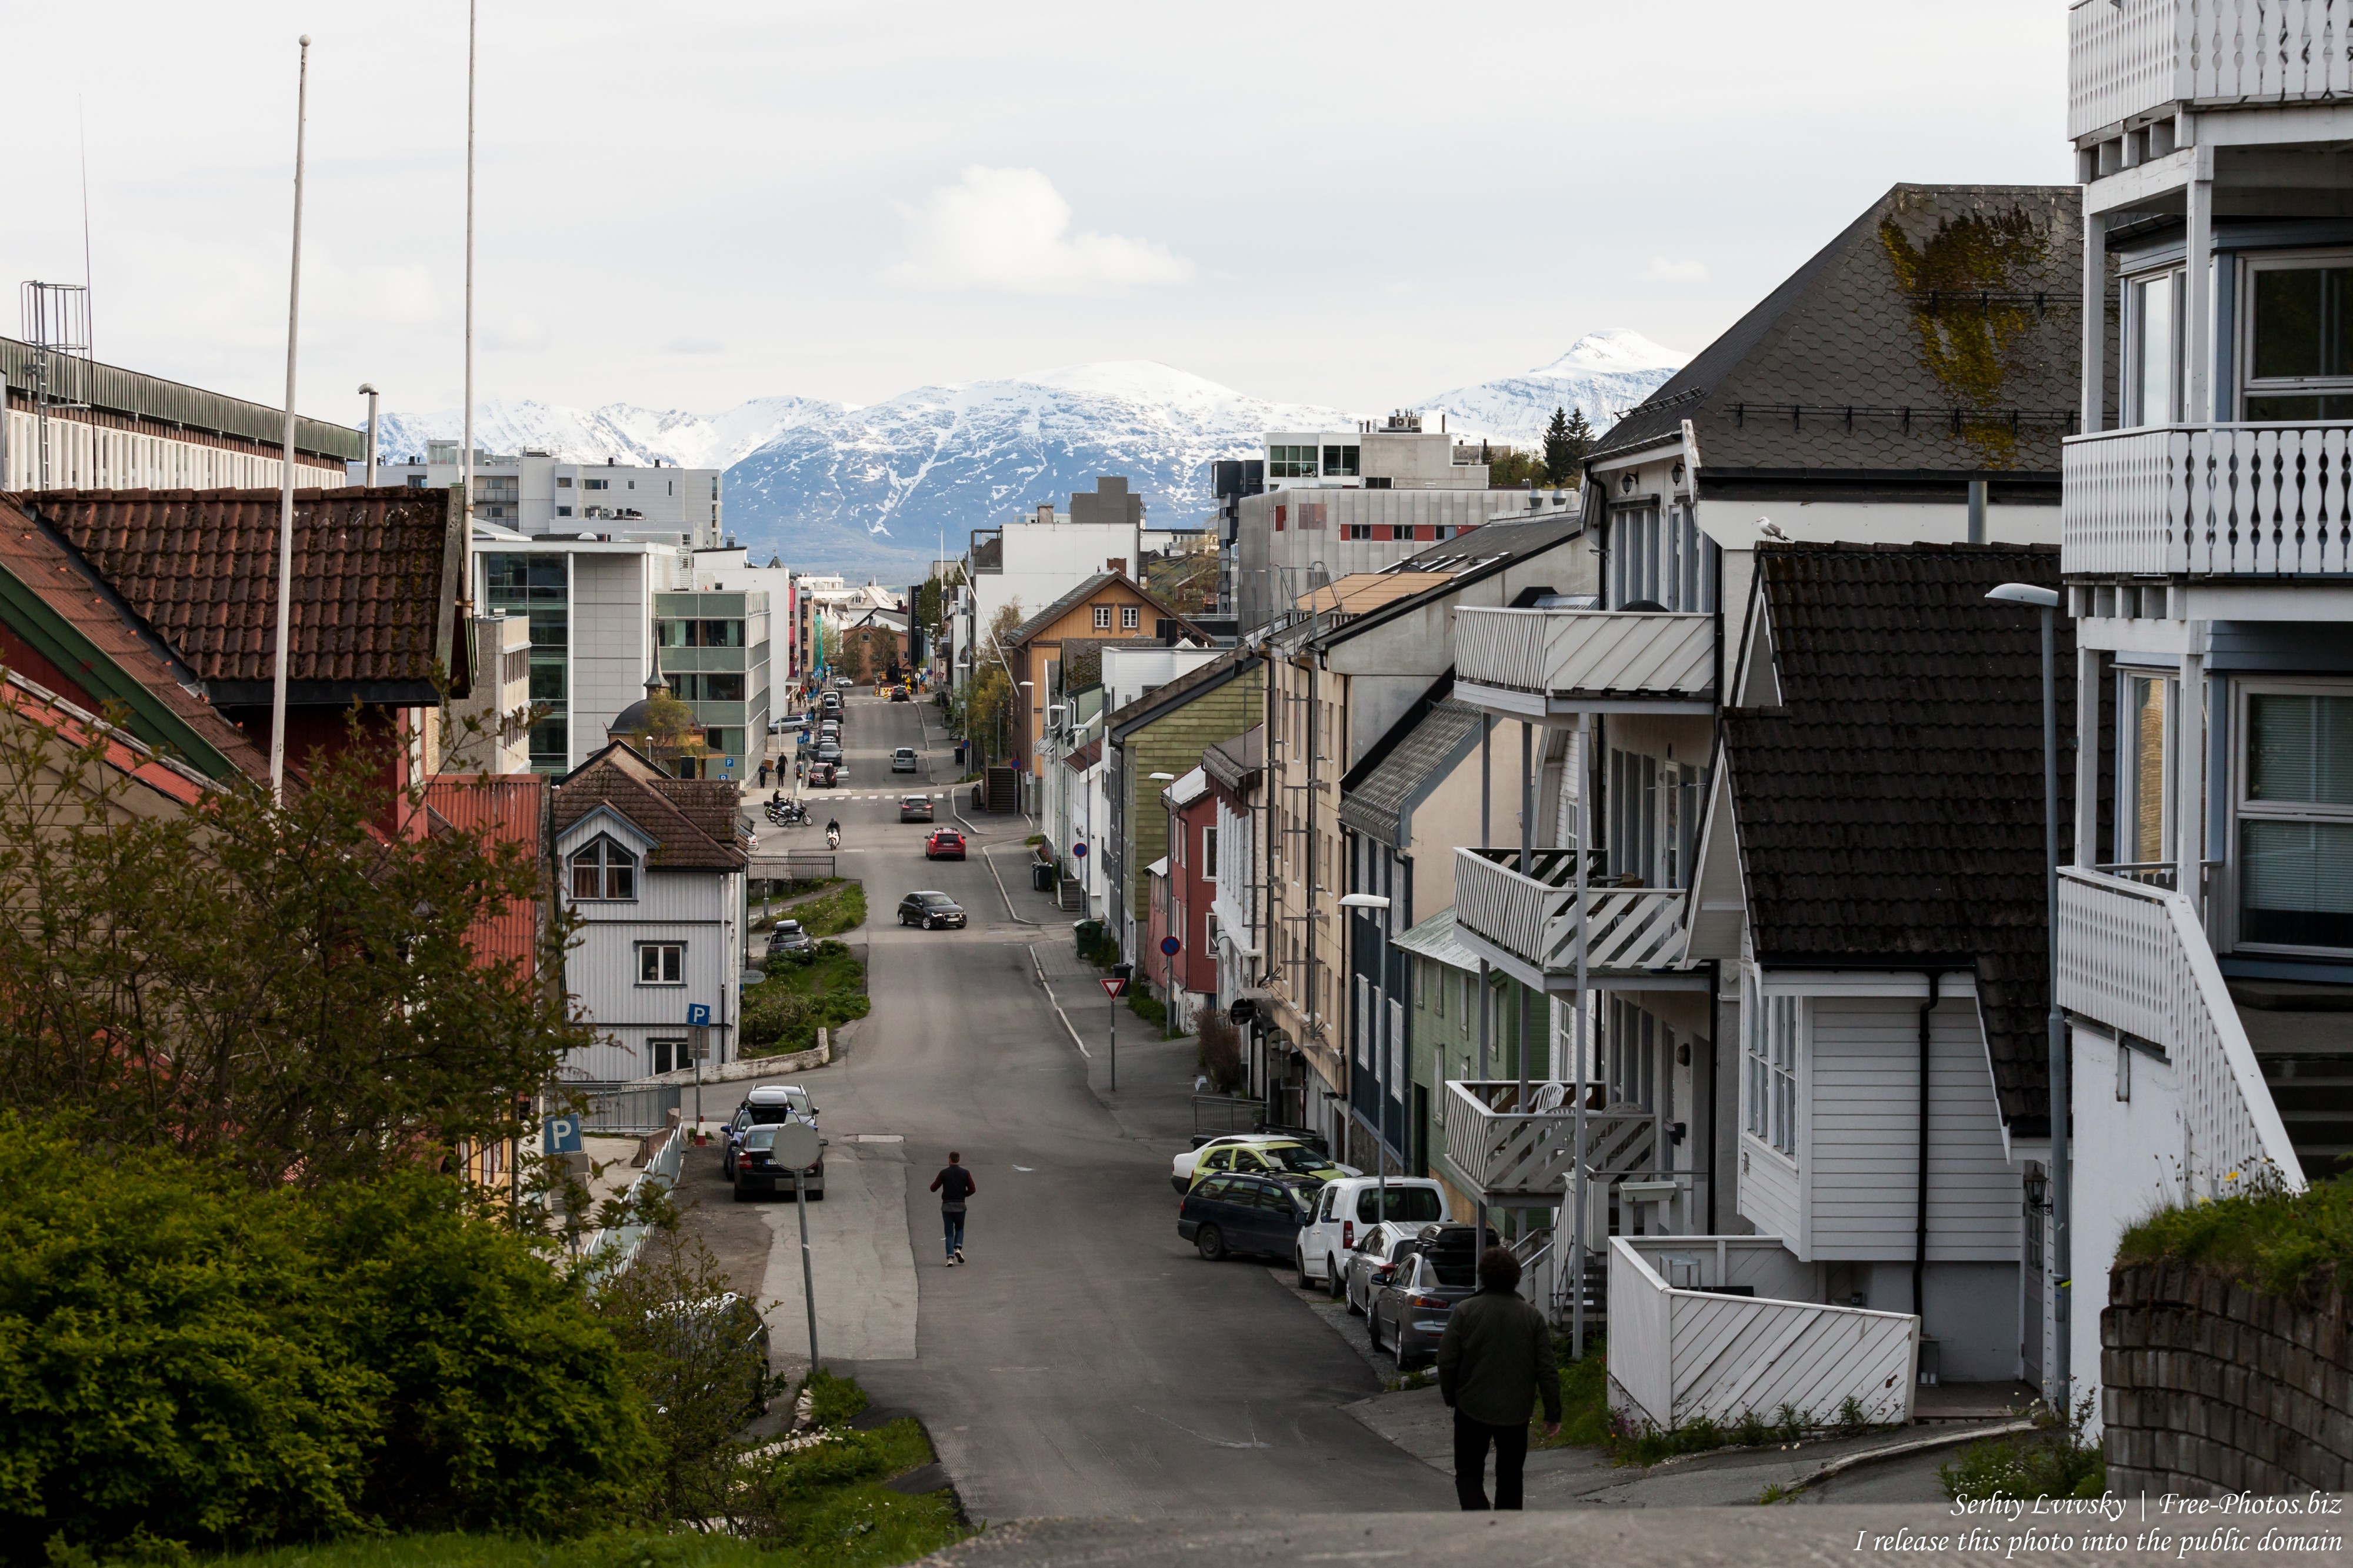 Tromso, Norway, photographed in June 2018 by Serhiy Lvivsky, picture 55